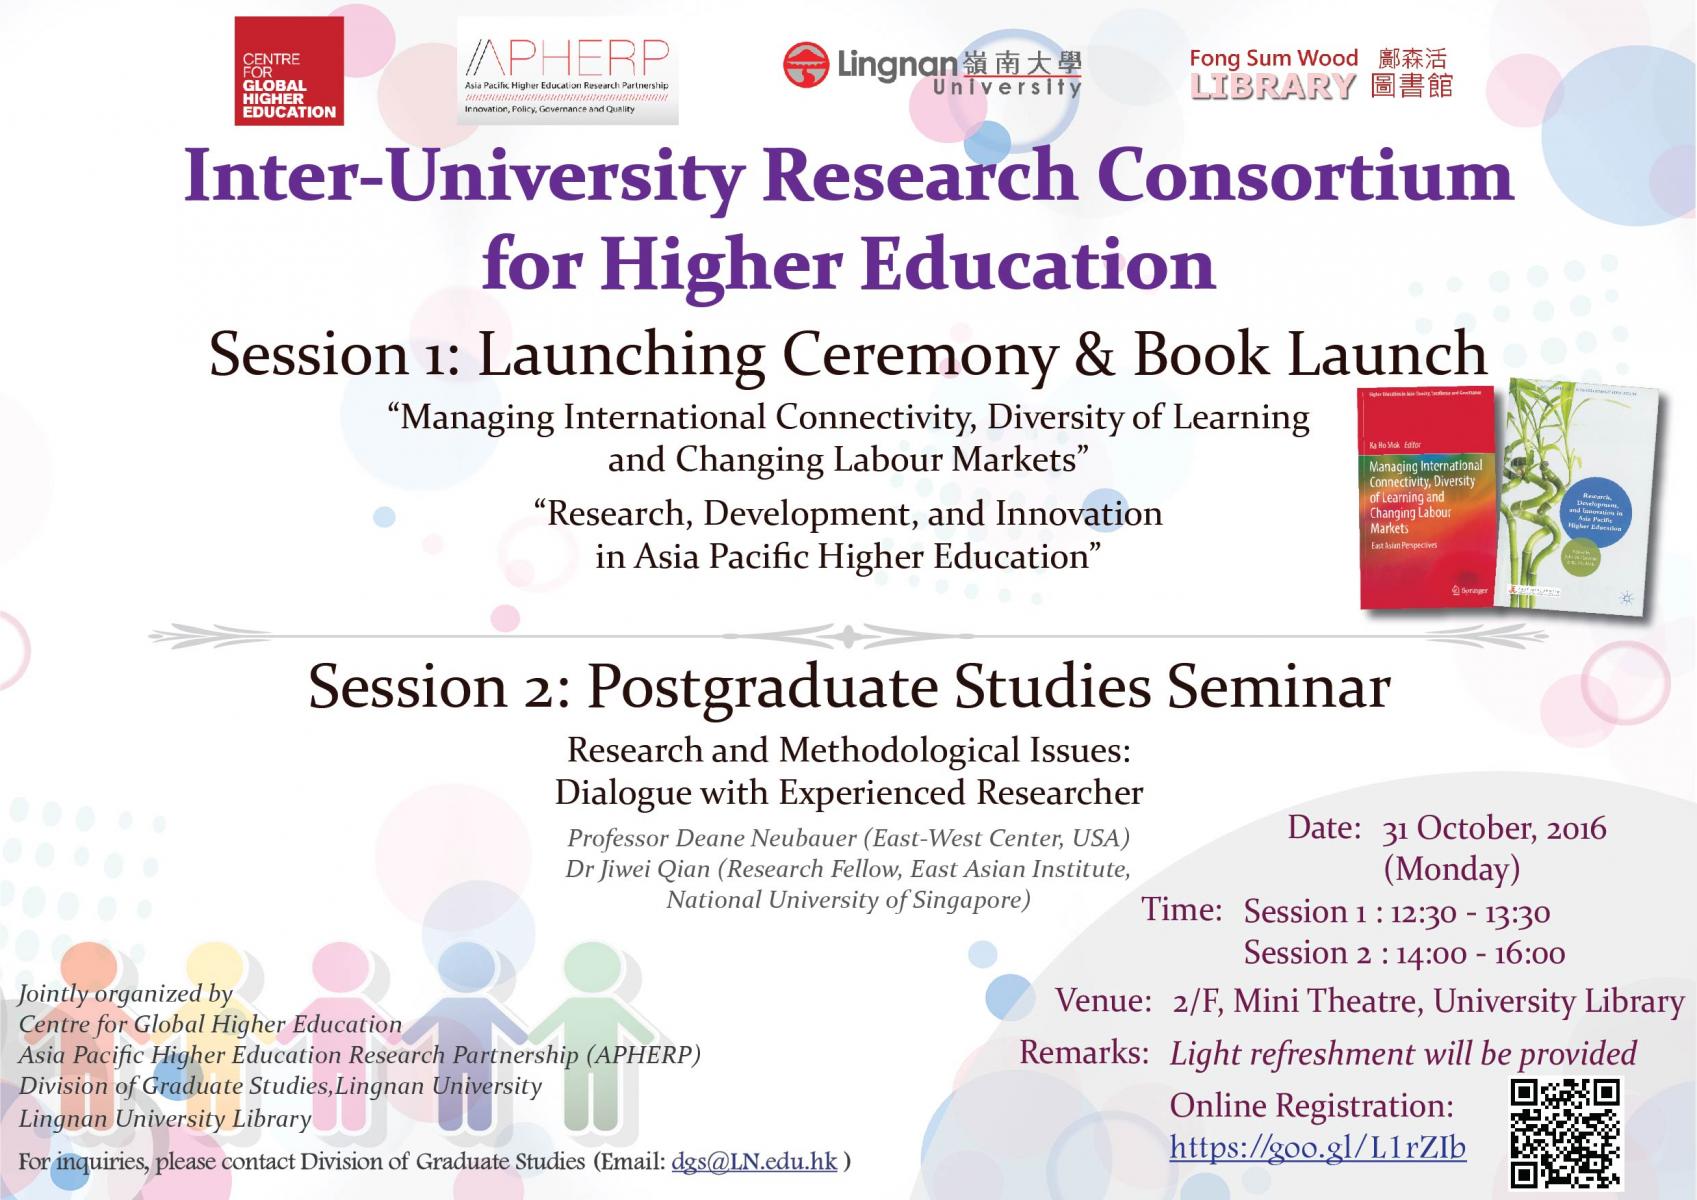 Inter-University Research Consortium for Higher Education Research: Session 1 Launching Ceremony & Book Launch